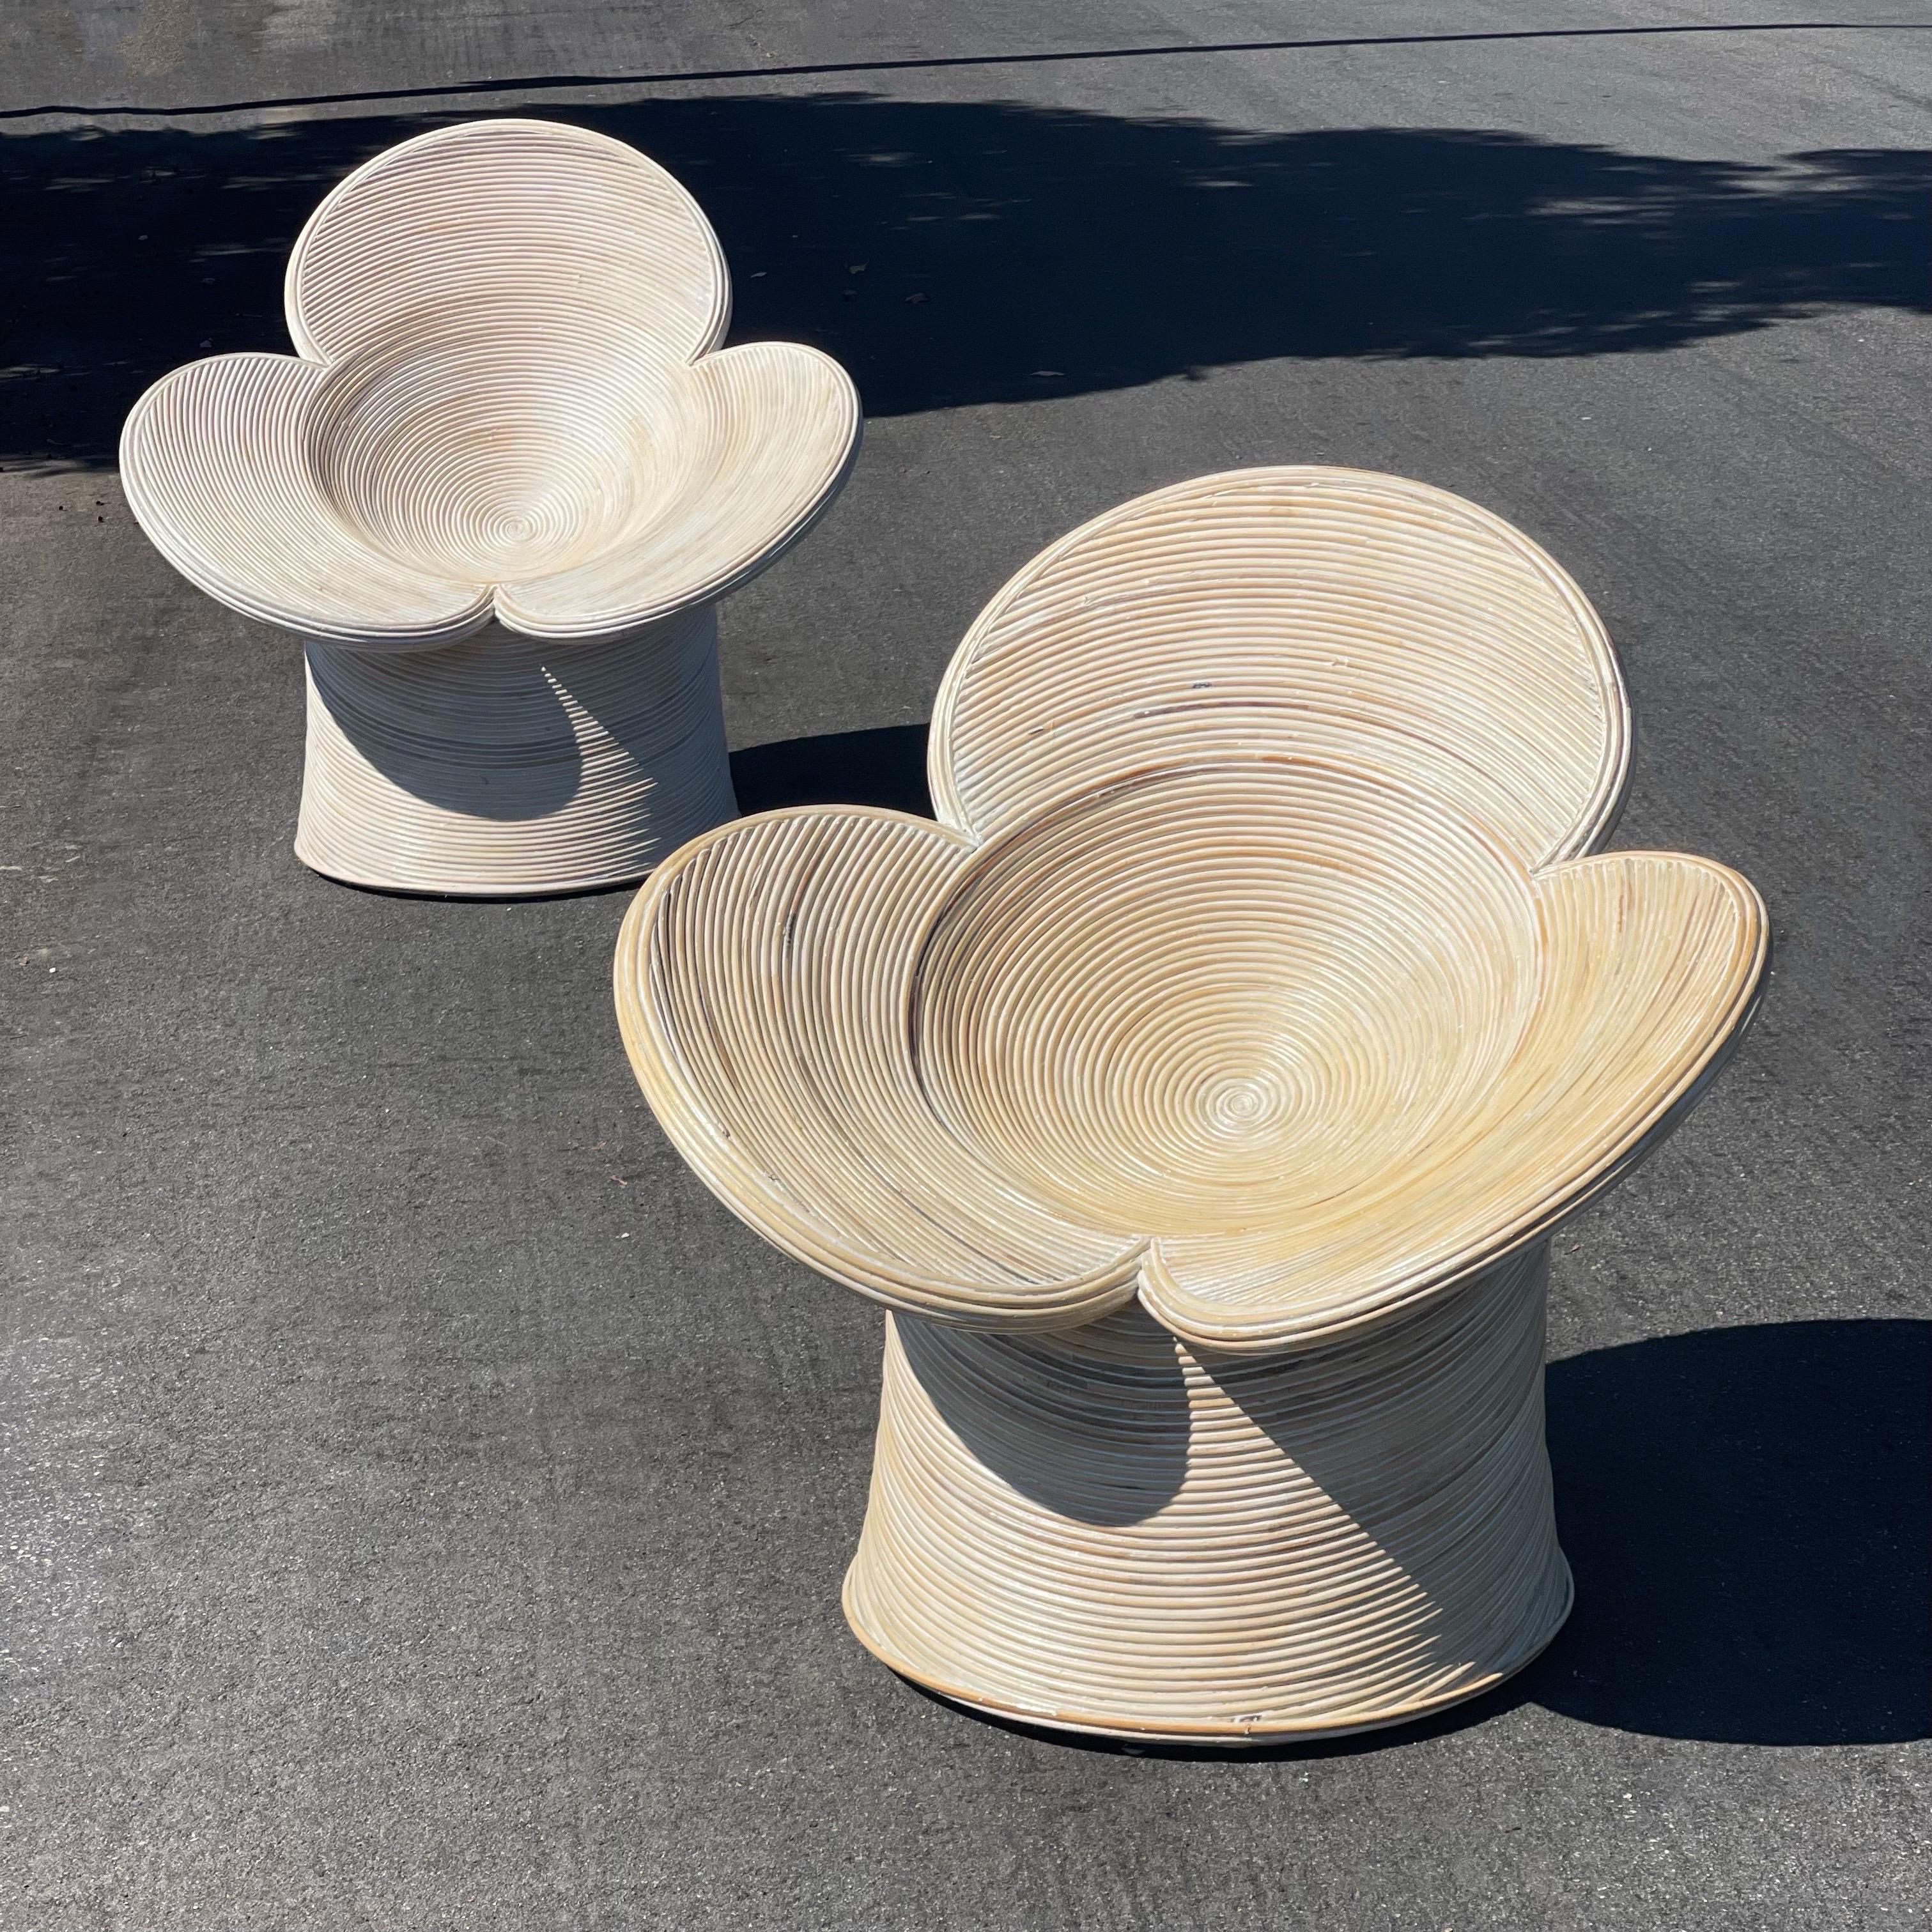 Beautiful set of vintage Pencil Reed chairs, designed in the shape of a flower. In beautiful condition, definitely a conversation starter and totally unique. Neutral tones to compliment any decor. 

